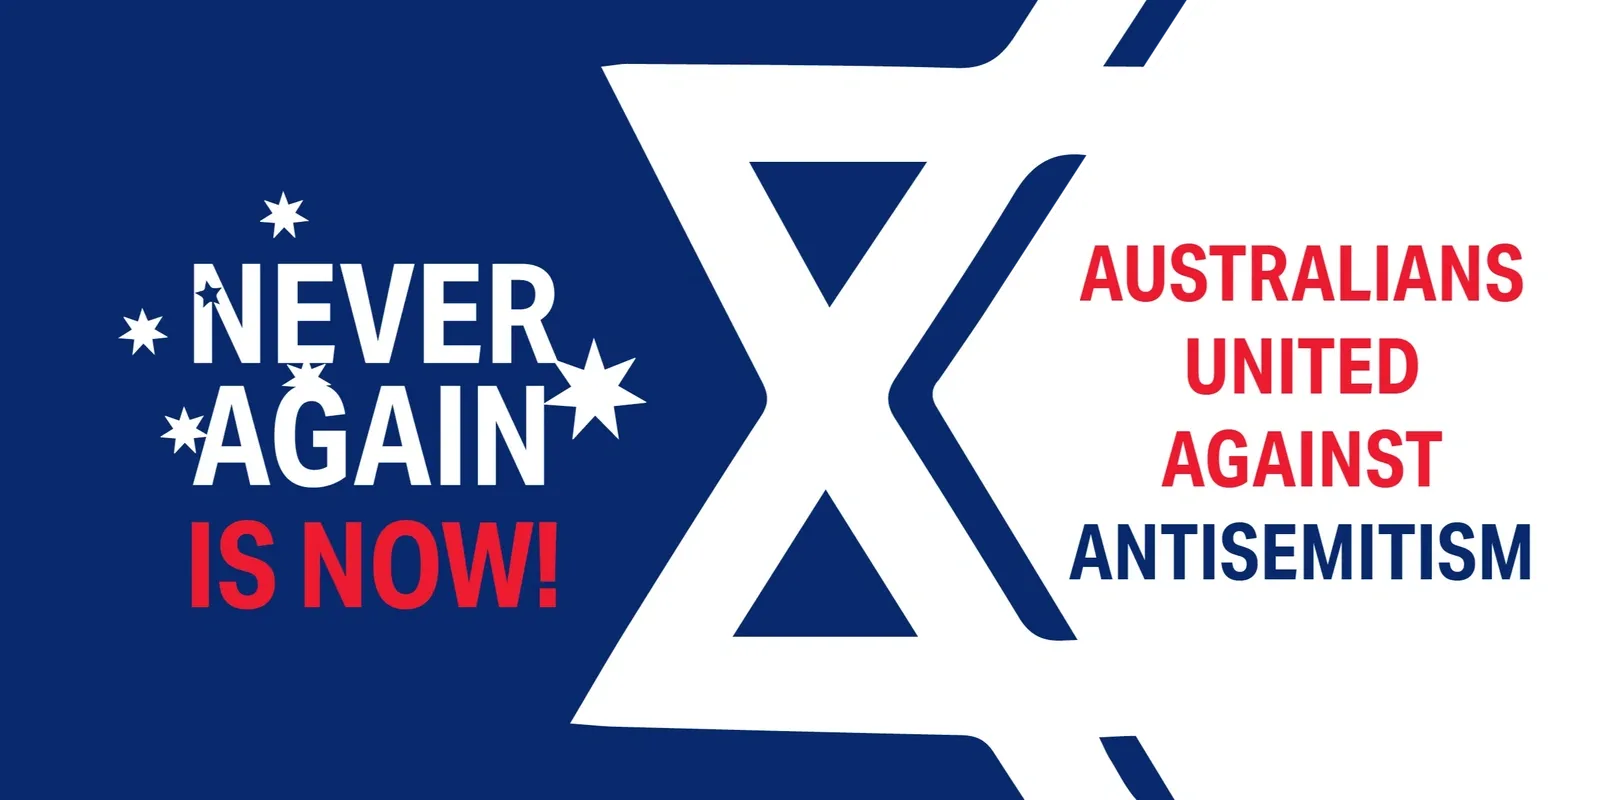 NEVER AGAIN IS NOW! MELBOURNE May 19th